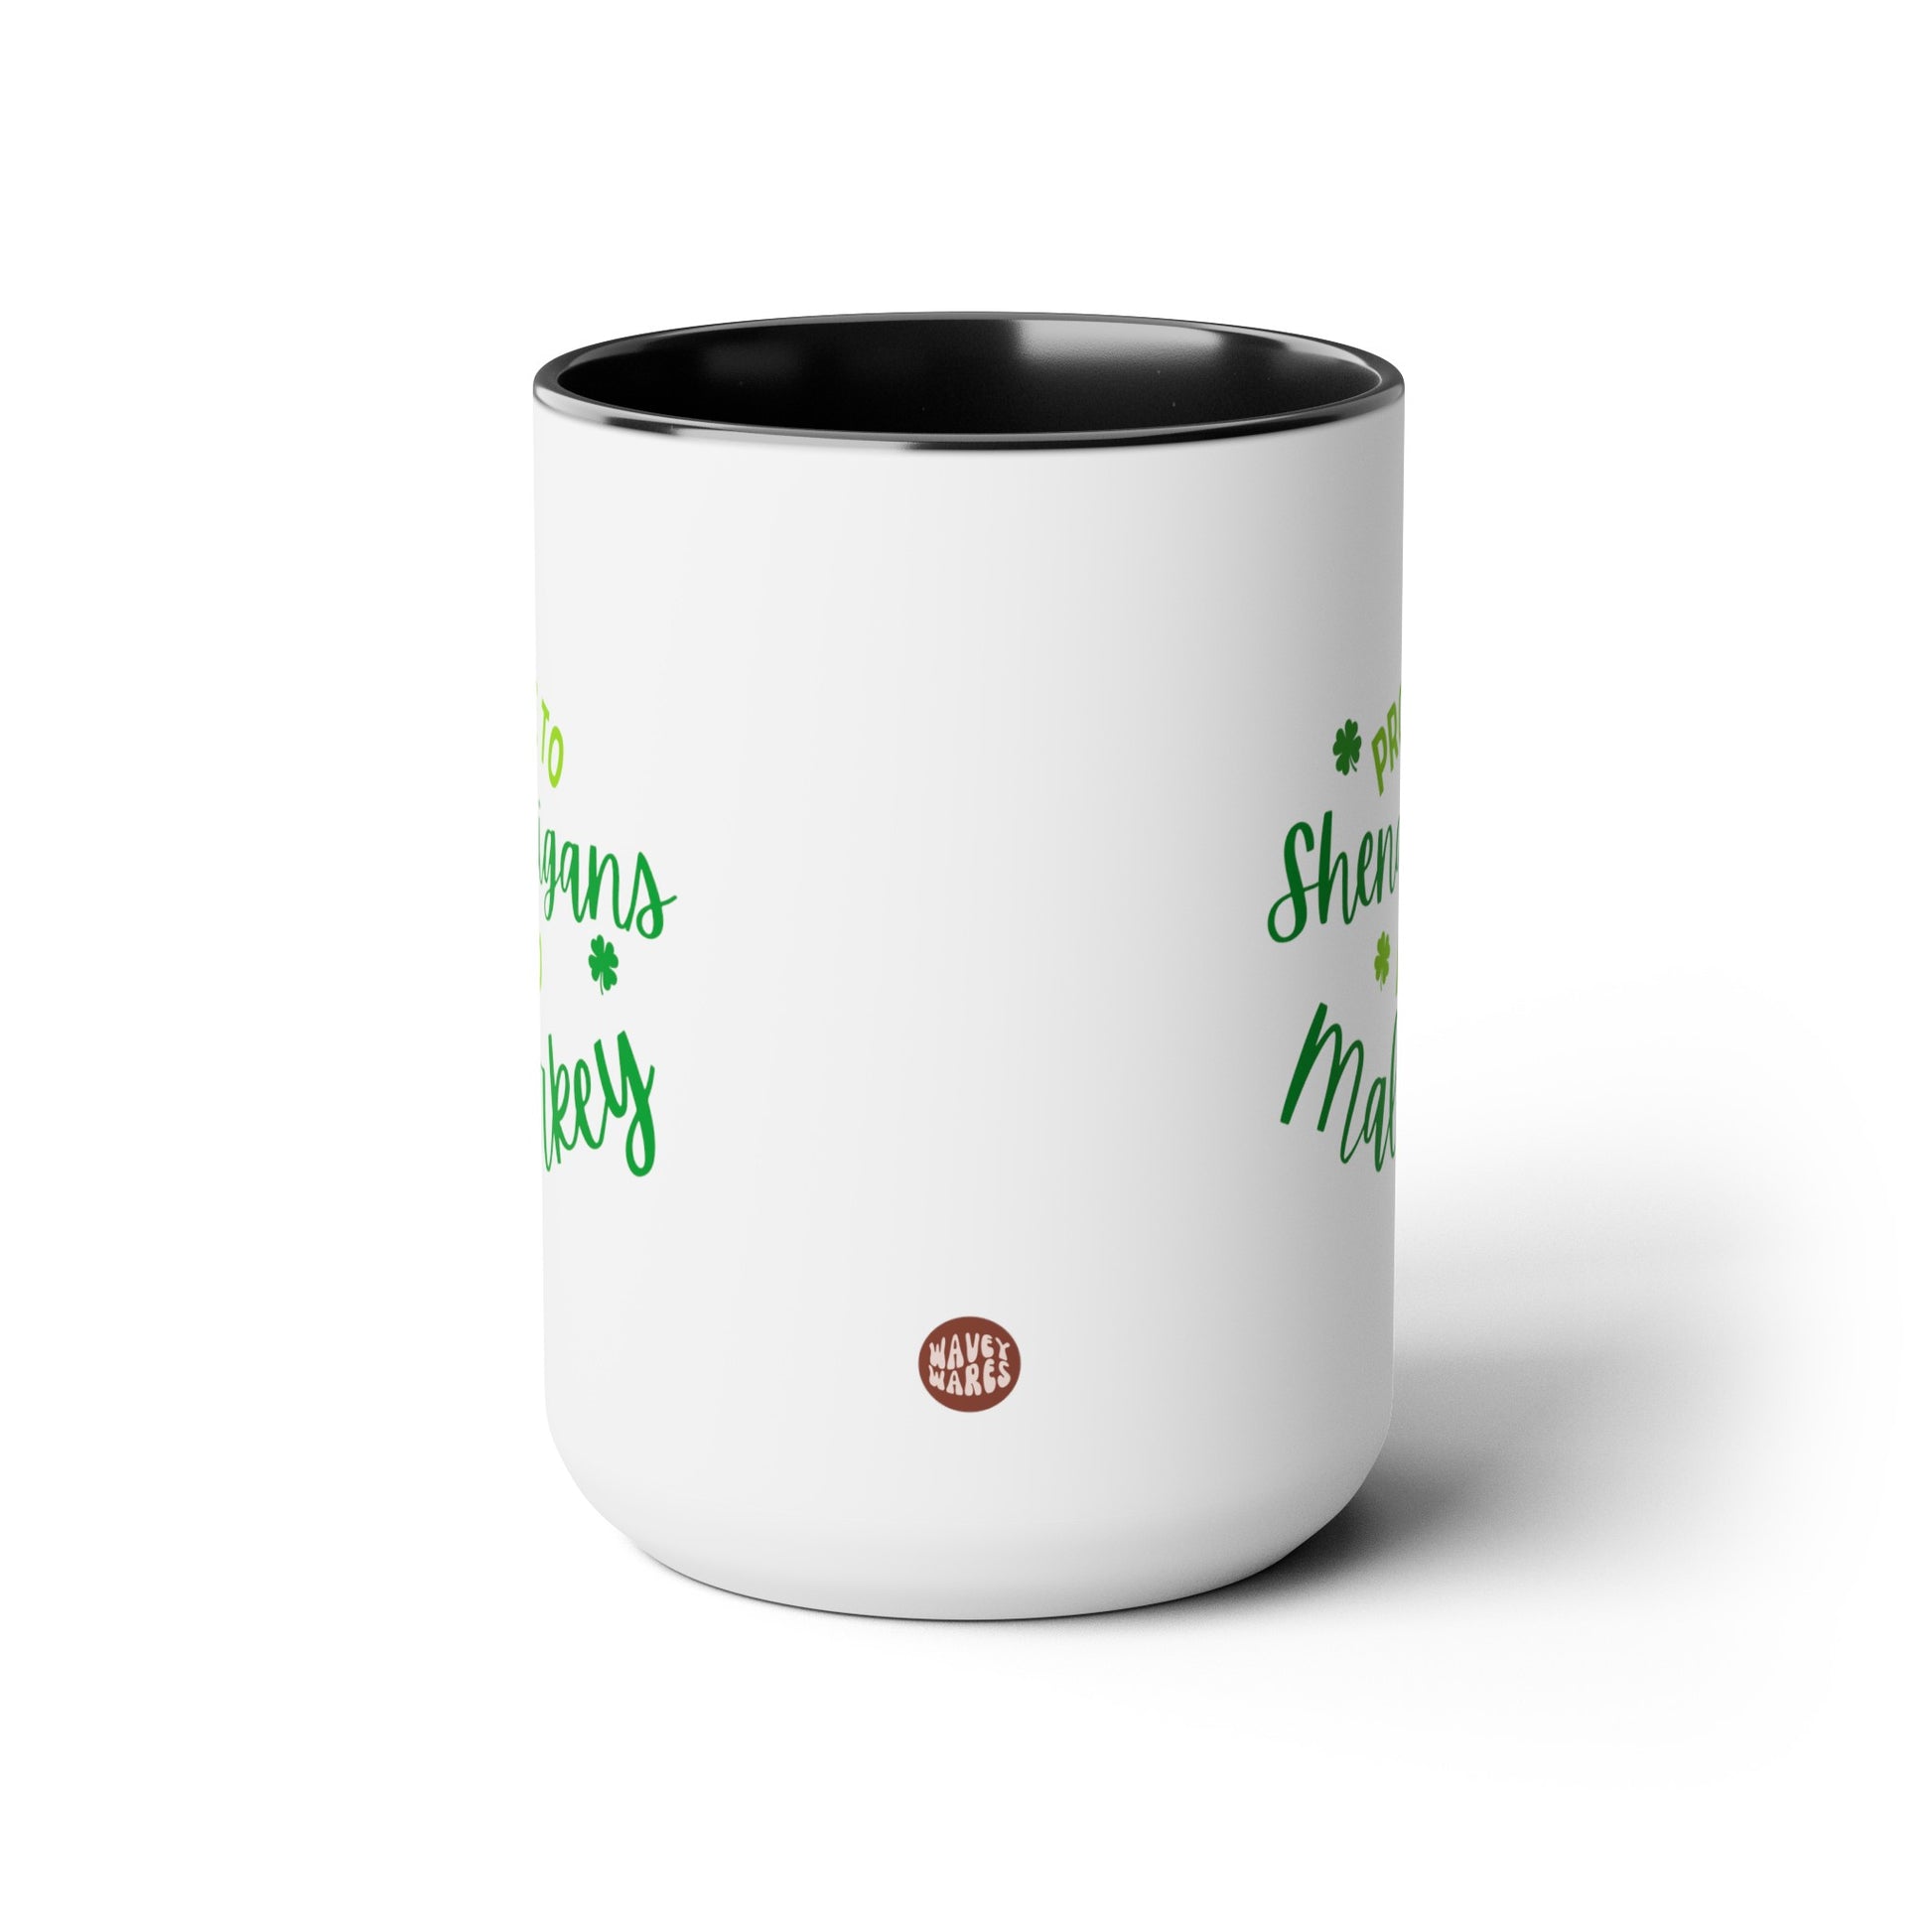 Prone To Shenanigans And Malarkey 15oz white with black accent funny large coffee mug gift for st pattys patricks day her wife girlfriend aunt daughter green waveywares wavey wares wavywares wavy wares side